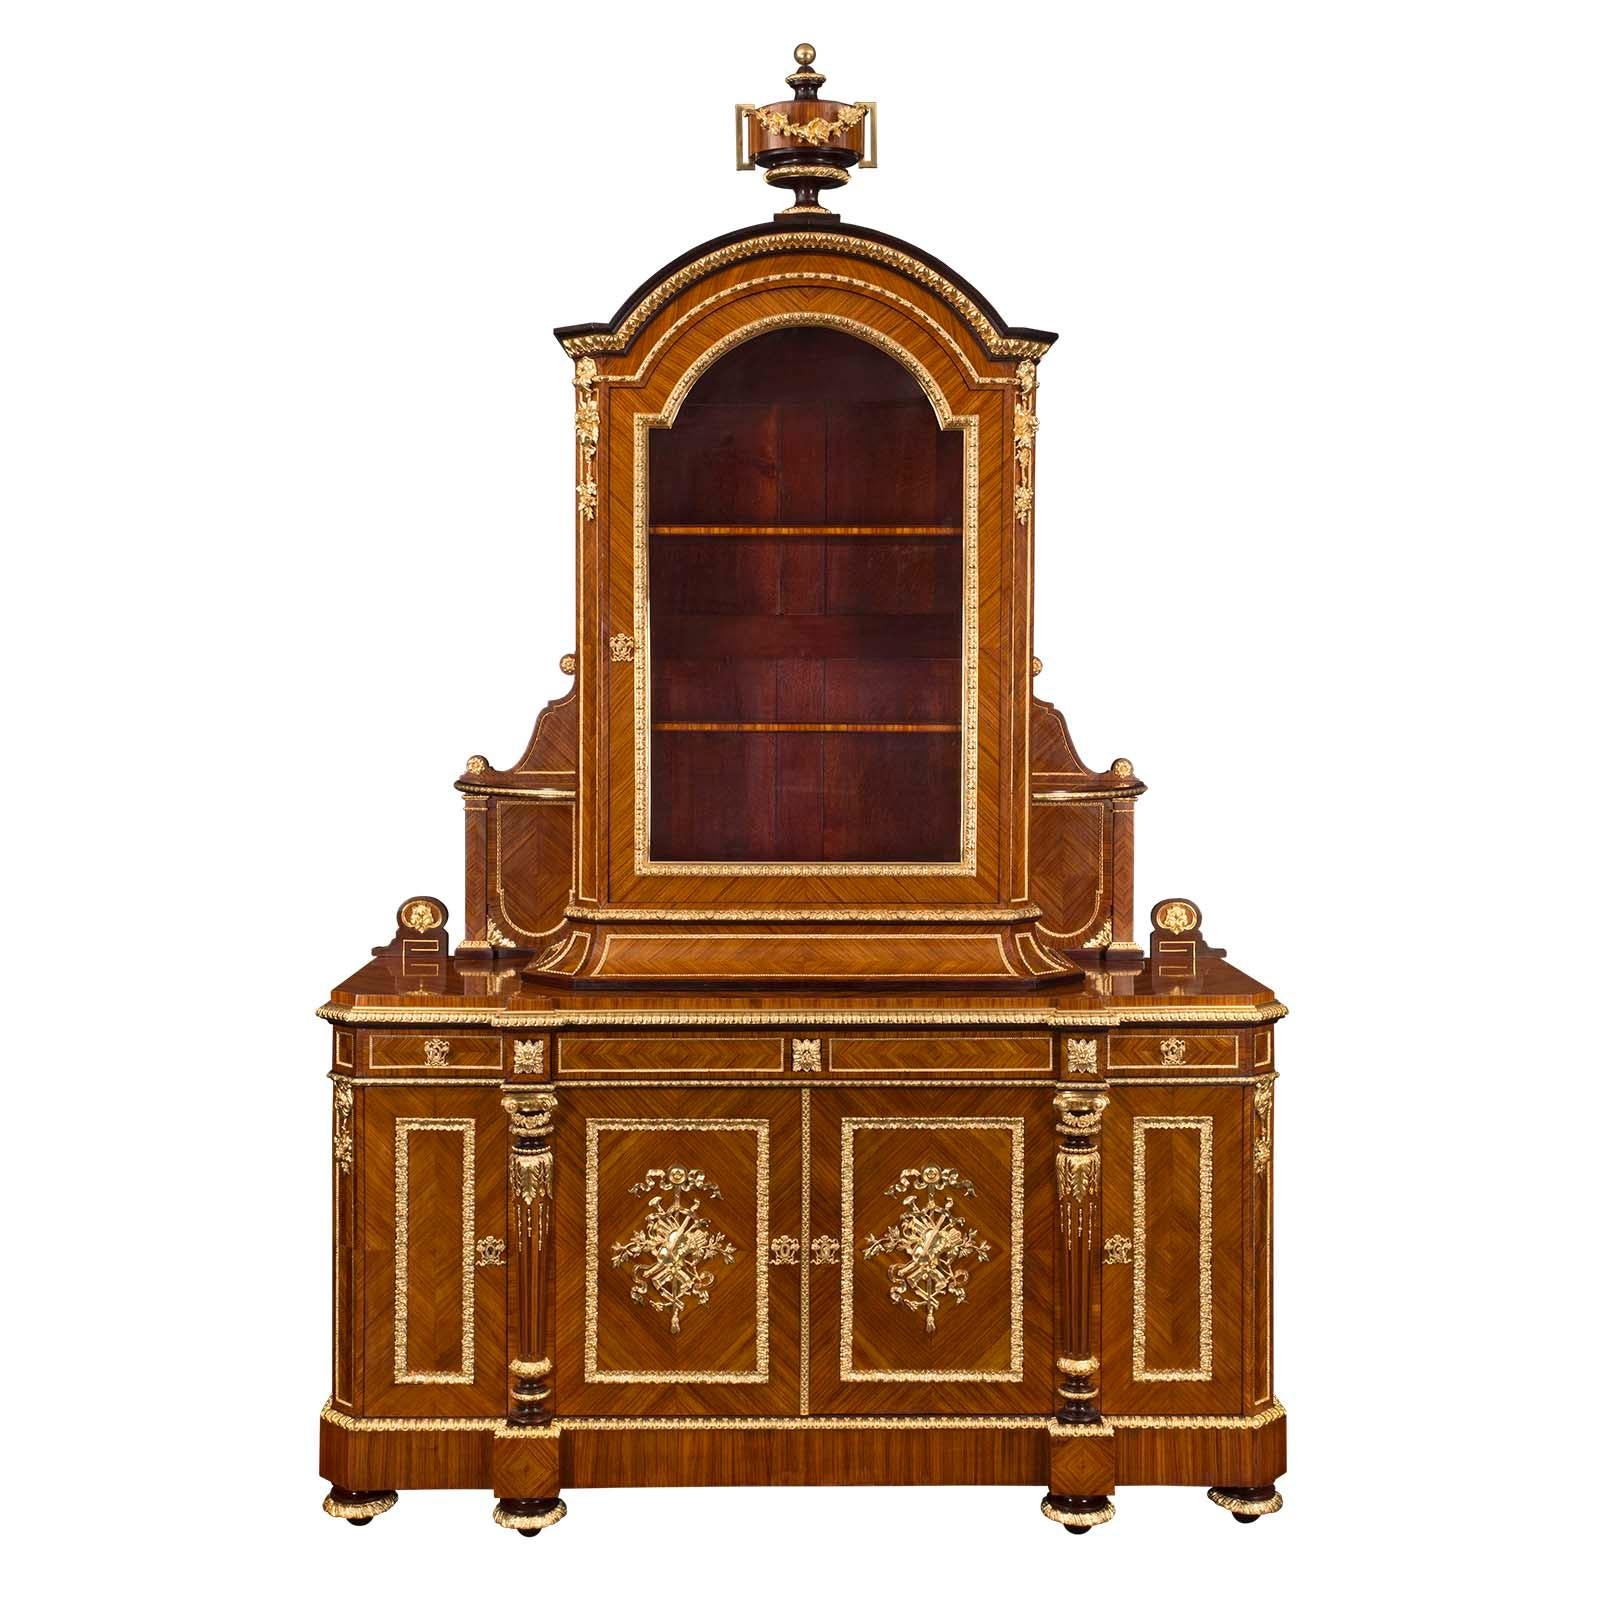 A stunning and extremely high quality French 19th century Louis XVI st. Belle Époque Period Tulipwood and ormolu cabinet by Grohé, à Paris. The cabinet is raised by six elegant topie shaped feet with foliate ormolu bands. Above the decorative ormolu